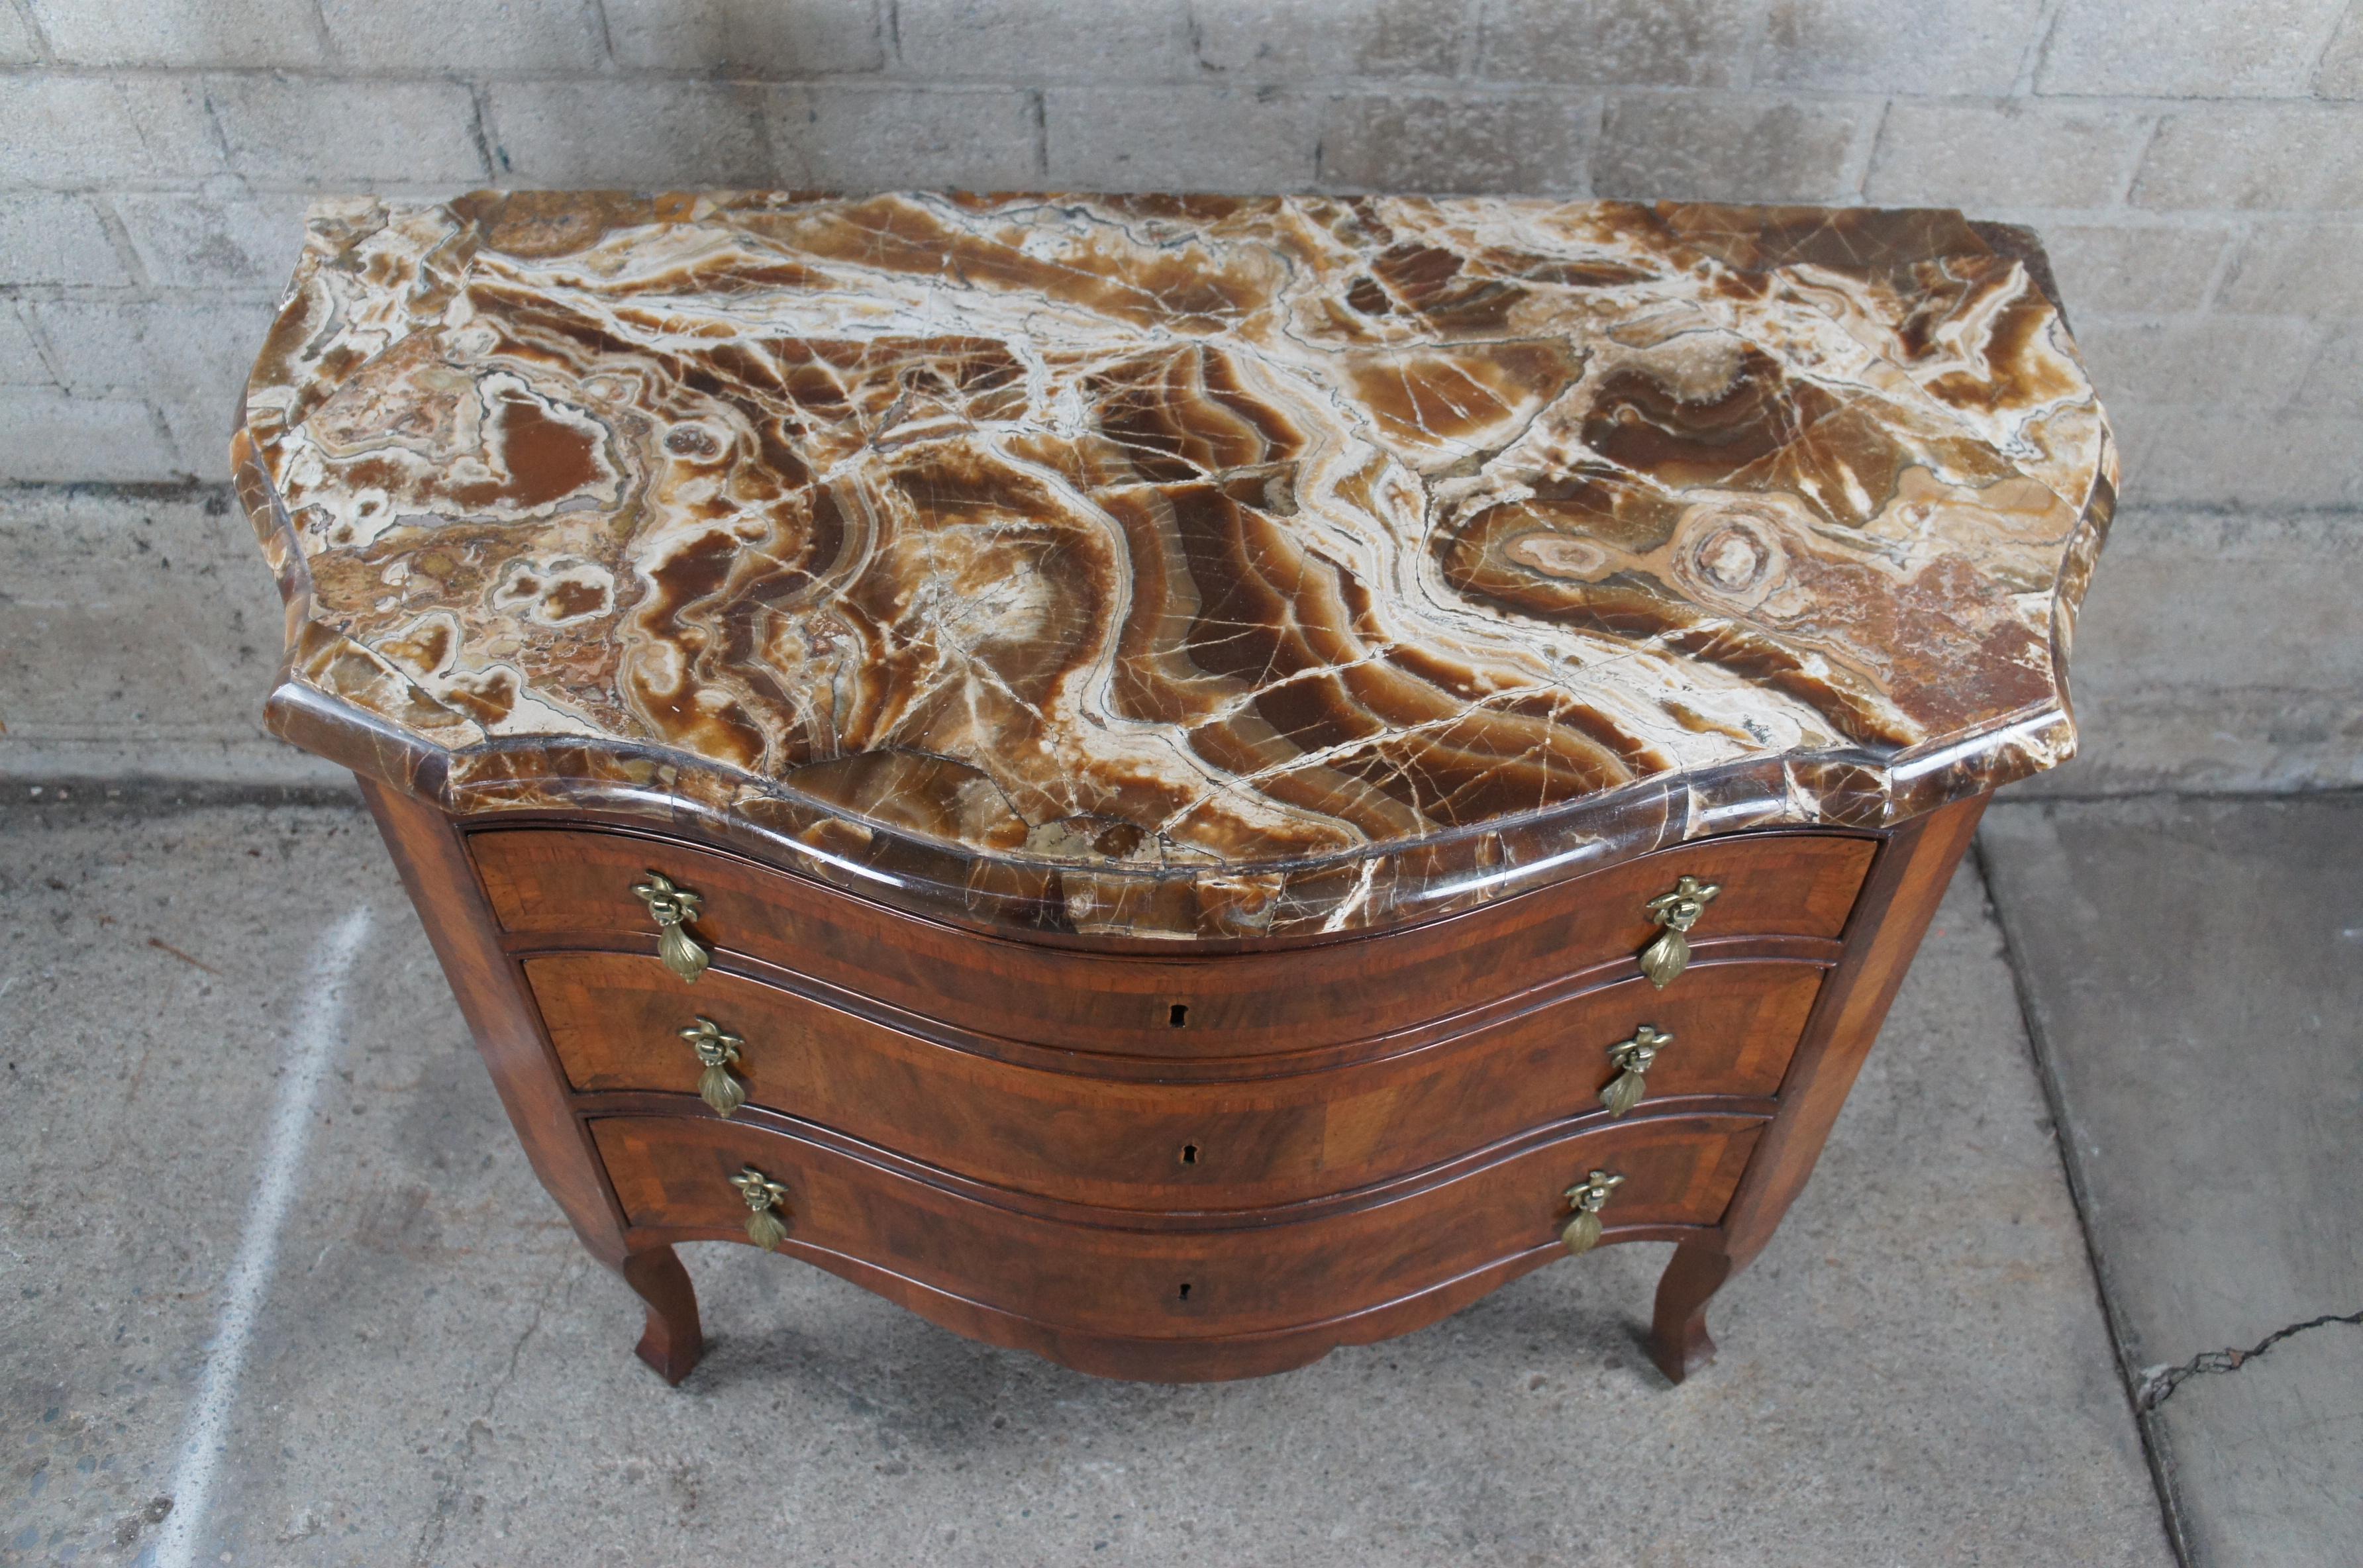 19th Century Antique Georgian Serpentine Mahogany Marble Top Inlaid Commode Chest of Drawers For Sale